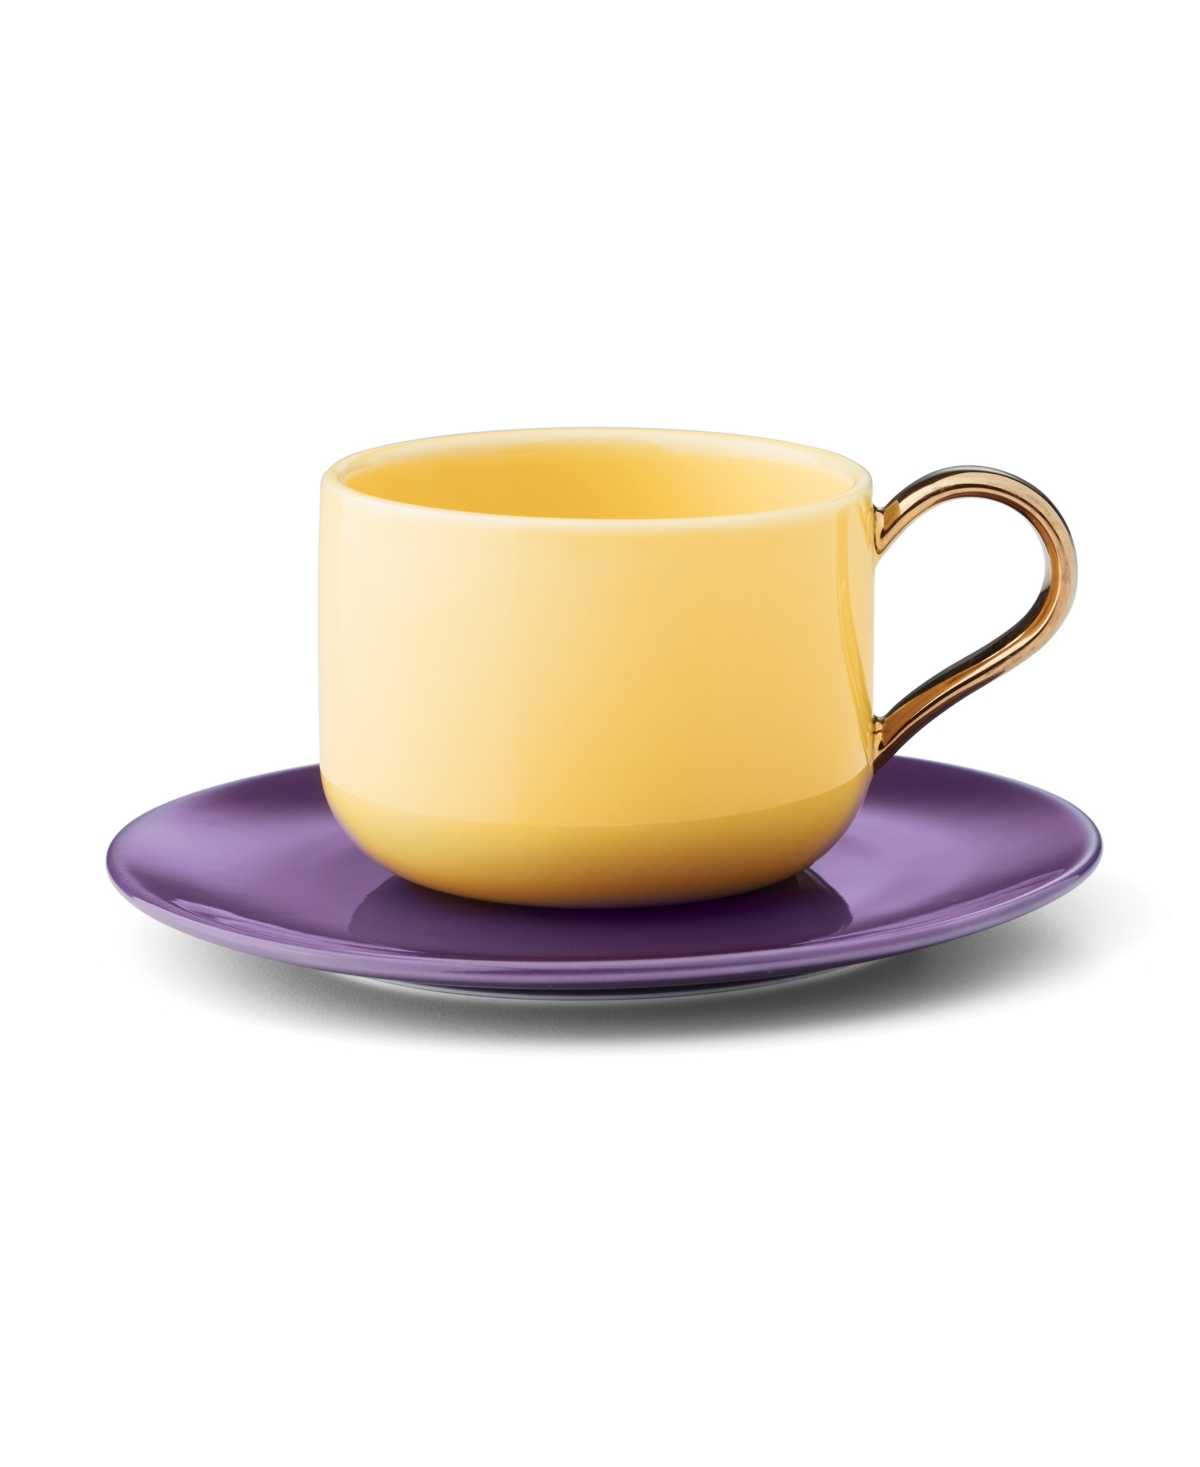 Kate Spade Make It Pop Cup Saucer Set In Yellow